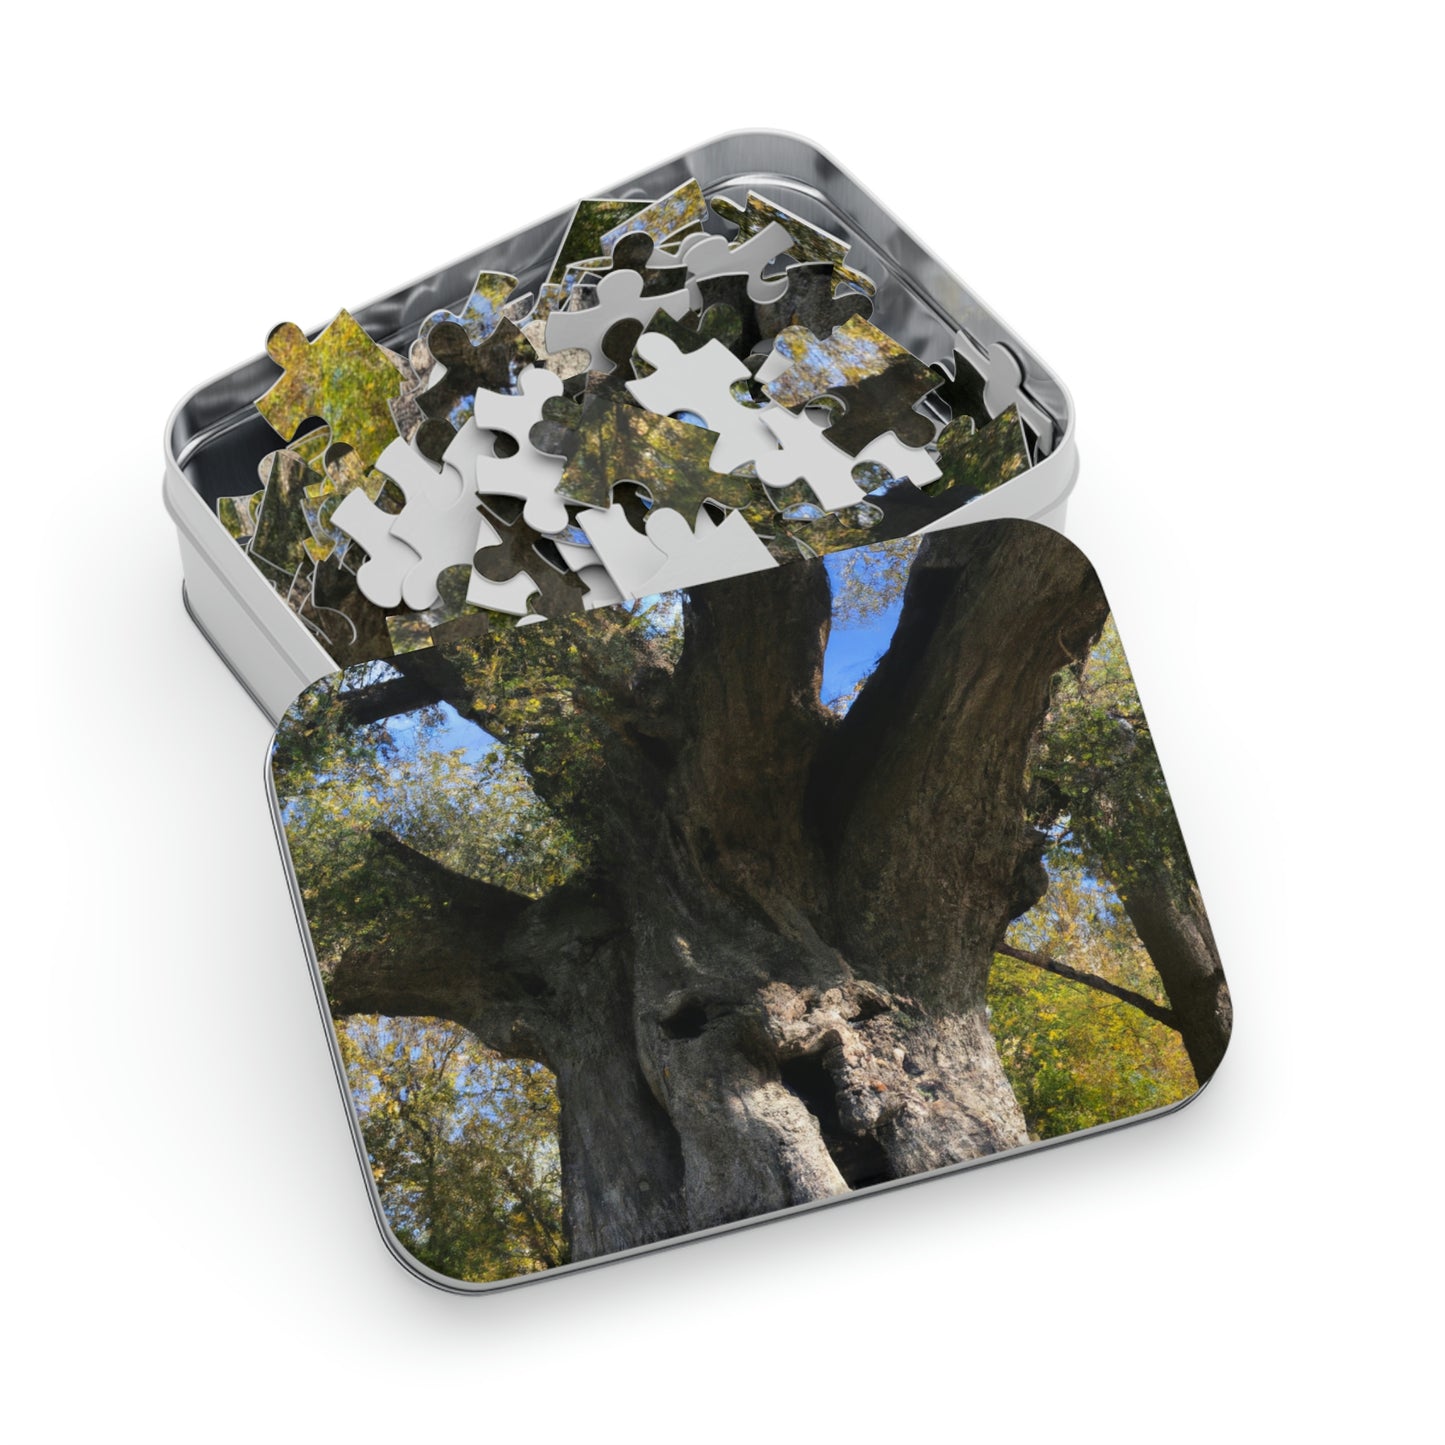 "The Great Guardian Tree" - The Alien Jigsaw Puzzle